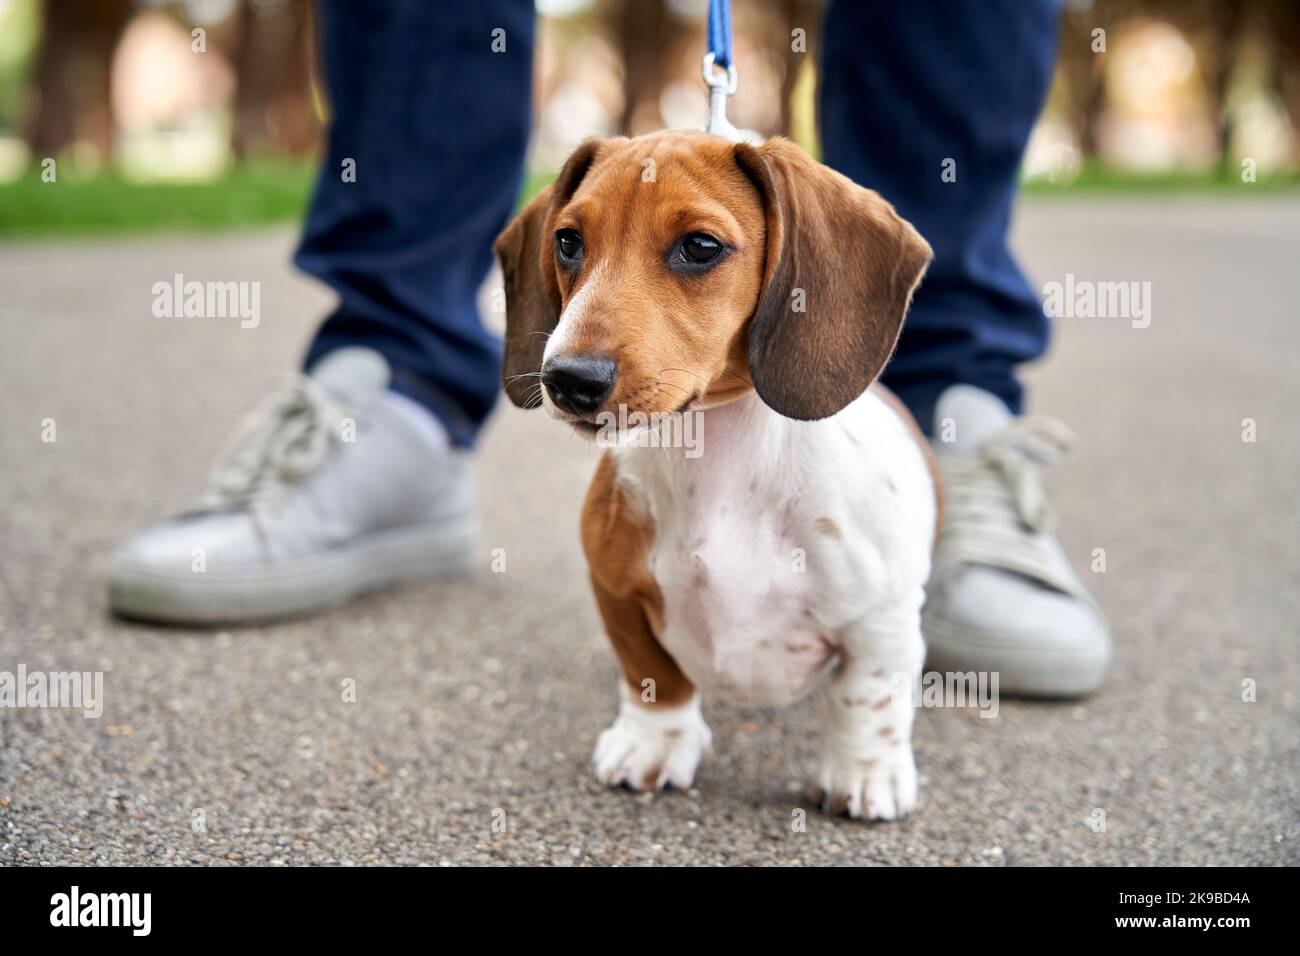 Miniature Dachshund puppy standing between owners legs while on a walk Stock Photo